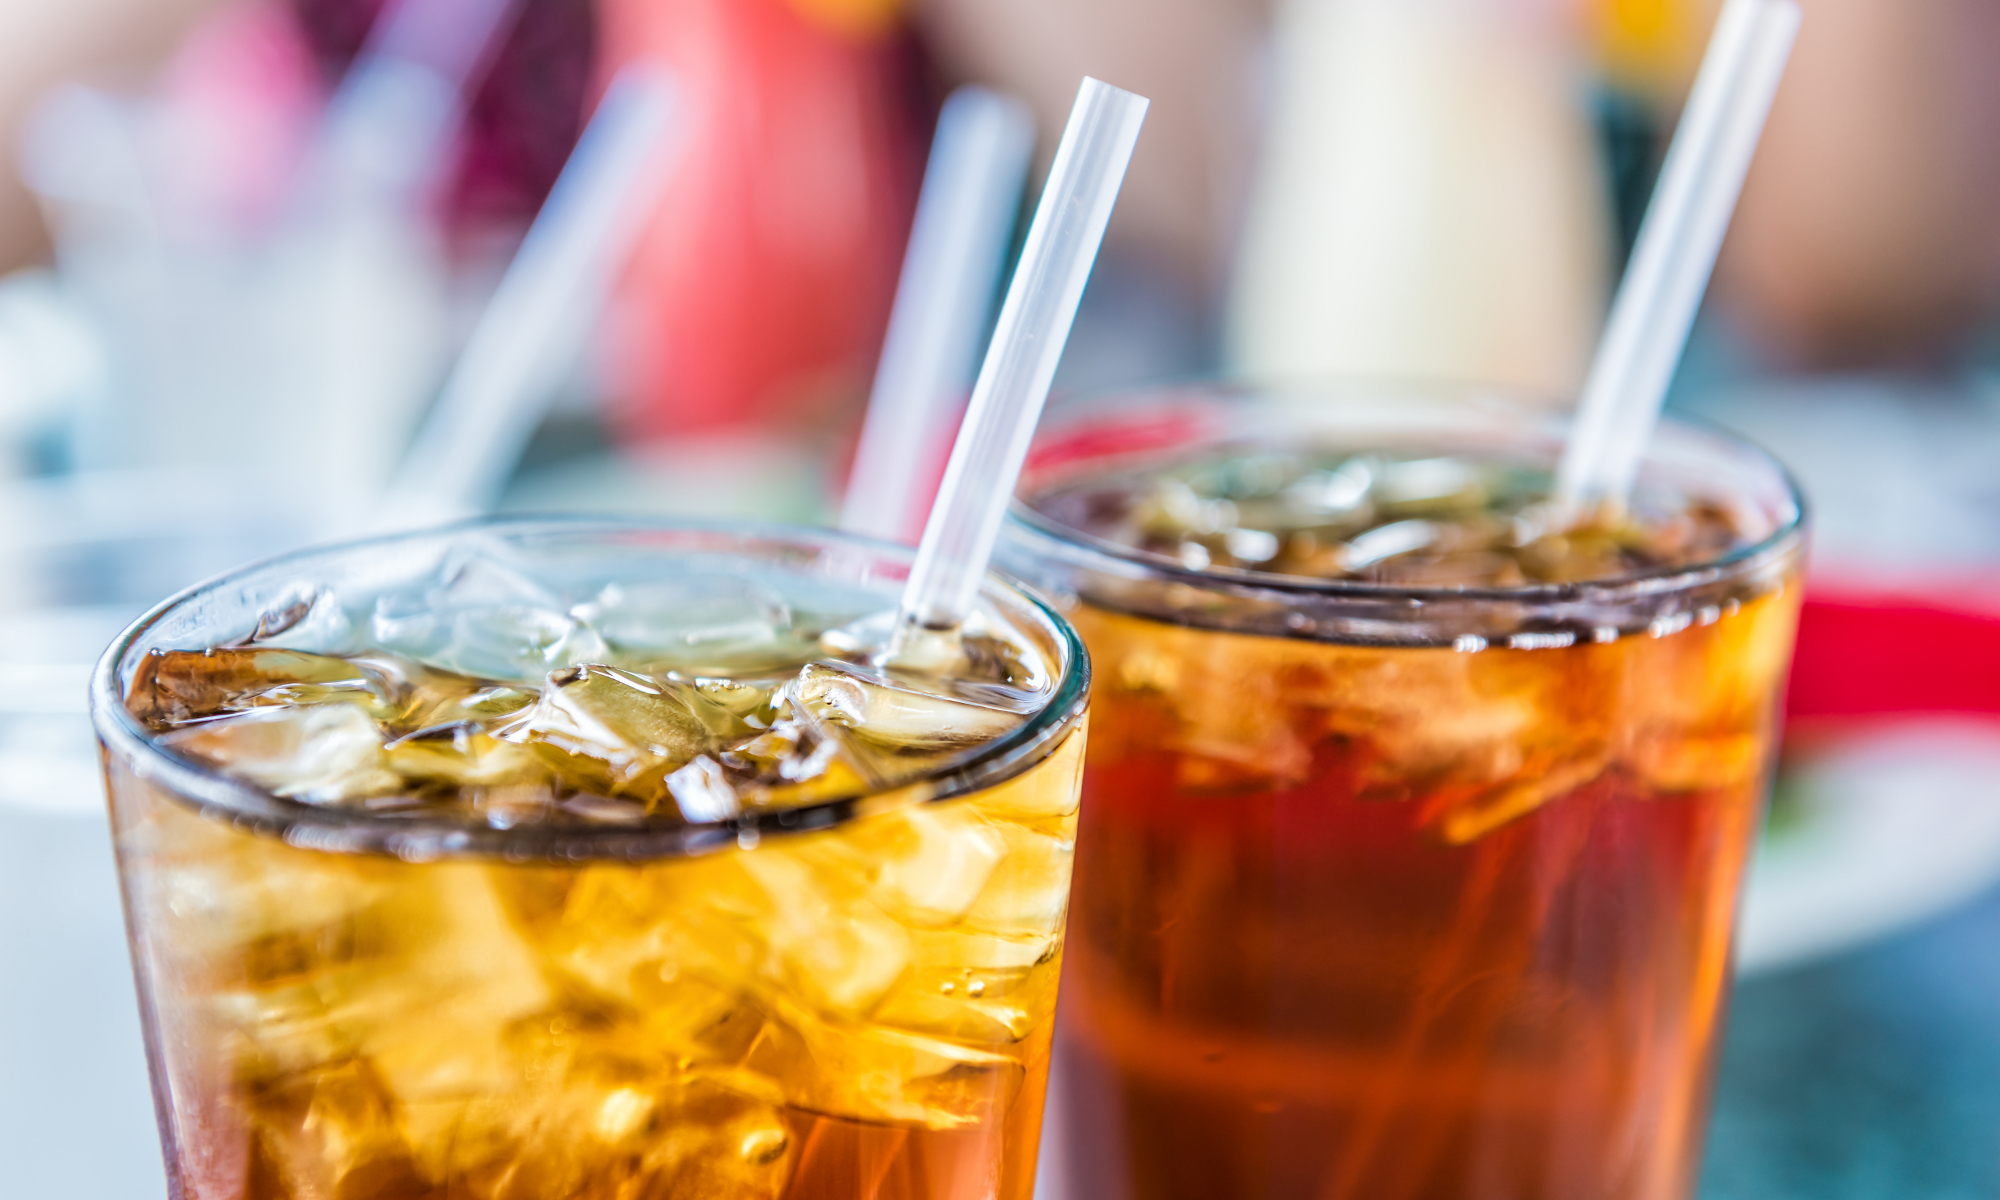 Two tall glasses of soda; Drinking sugary beverages actually increases thirst and packs in calories without nutritional benefit